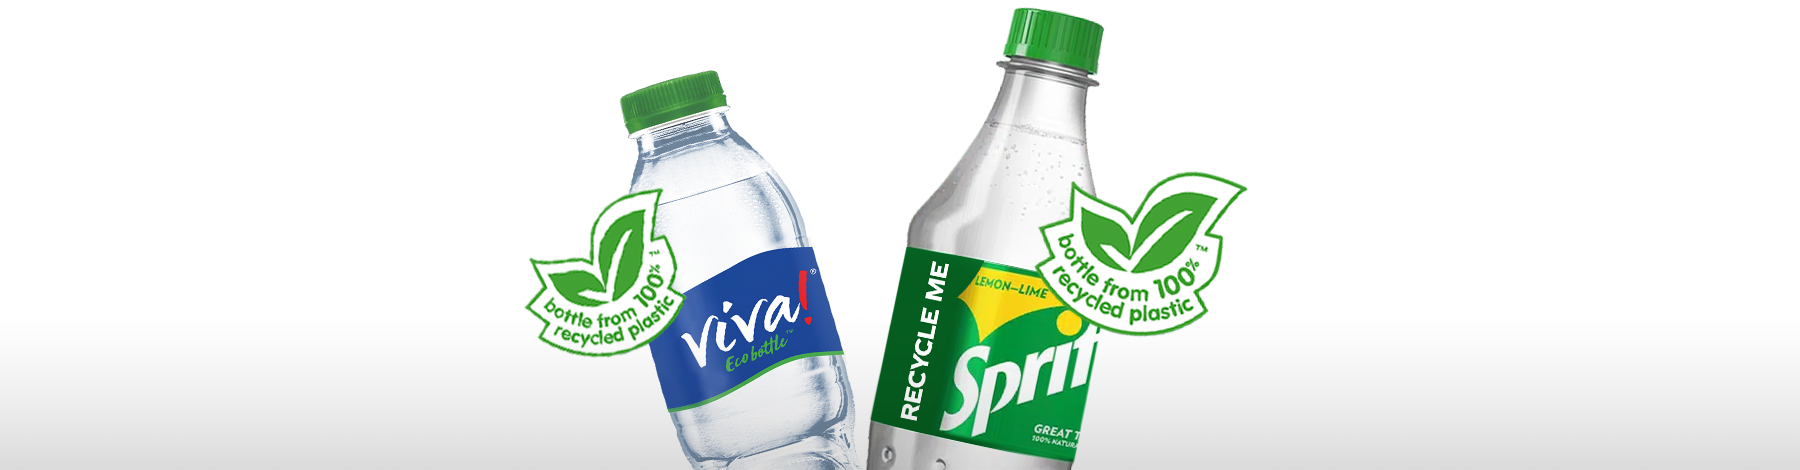 A bottle of Sprite and a bottle of the Viva! eco-bottle, with the phrase "bottle from 100% recycled plastic"